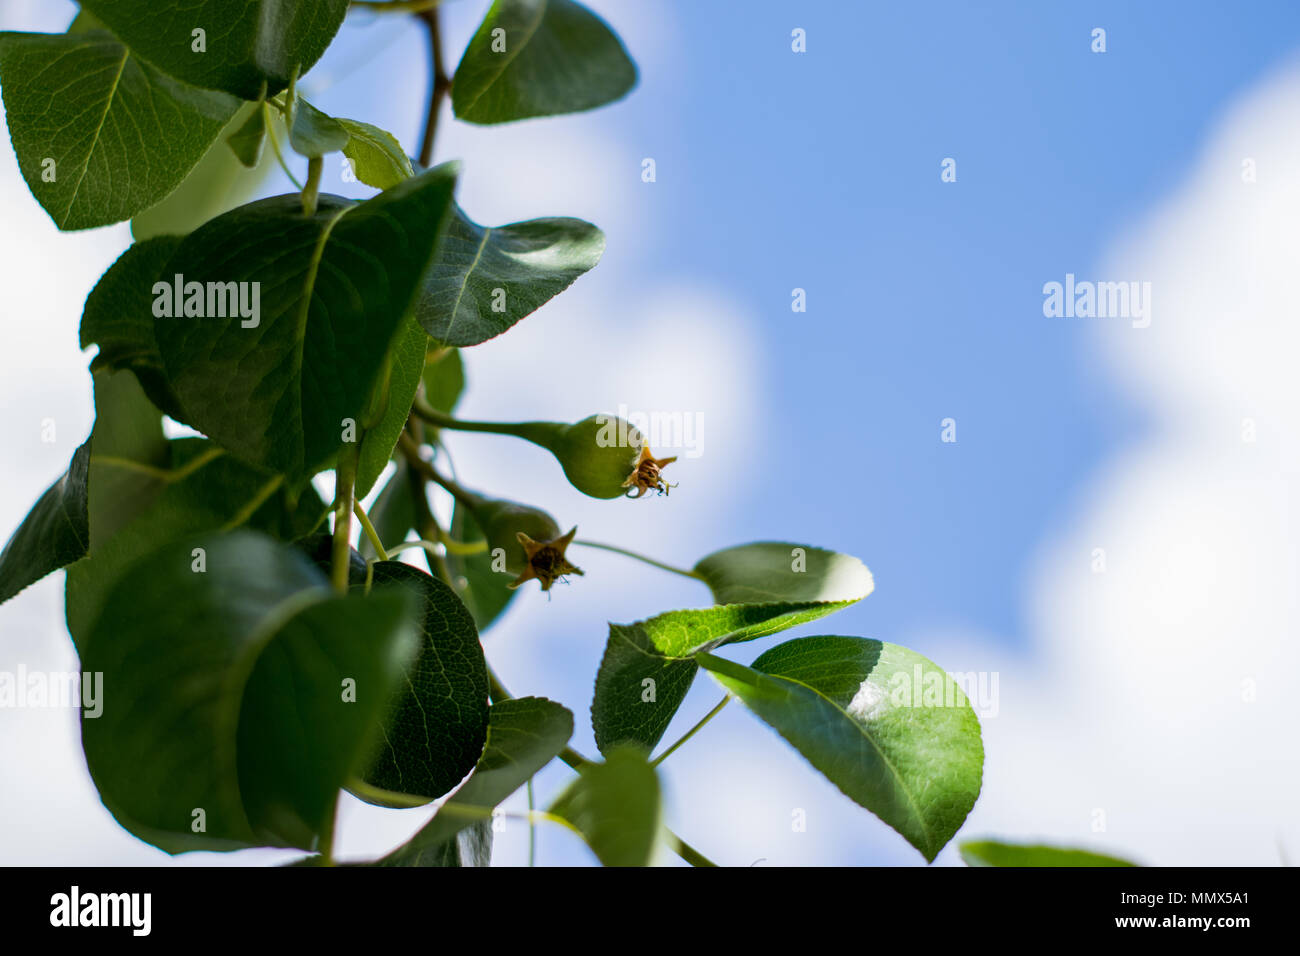 Fruit Pear growing in the tree Stock Photo